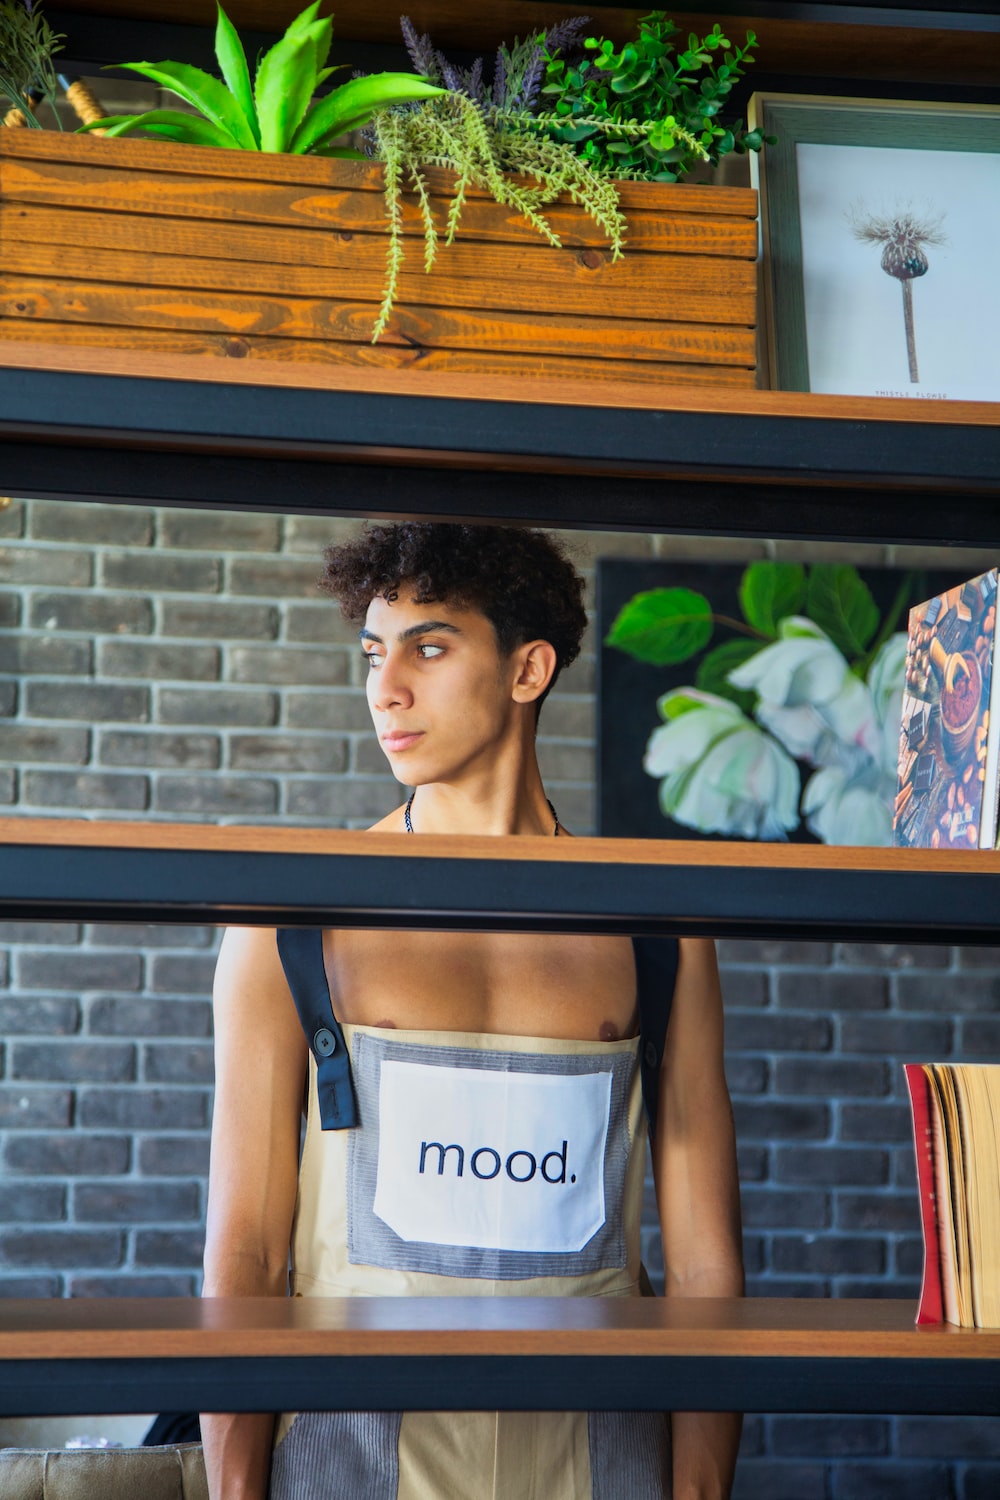 a mannequin wearing an apron with the word mood printed on it